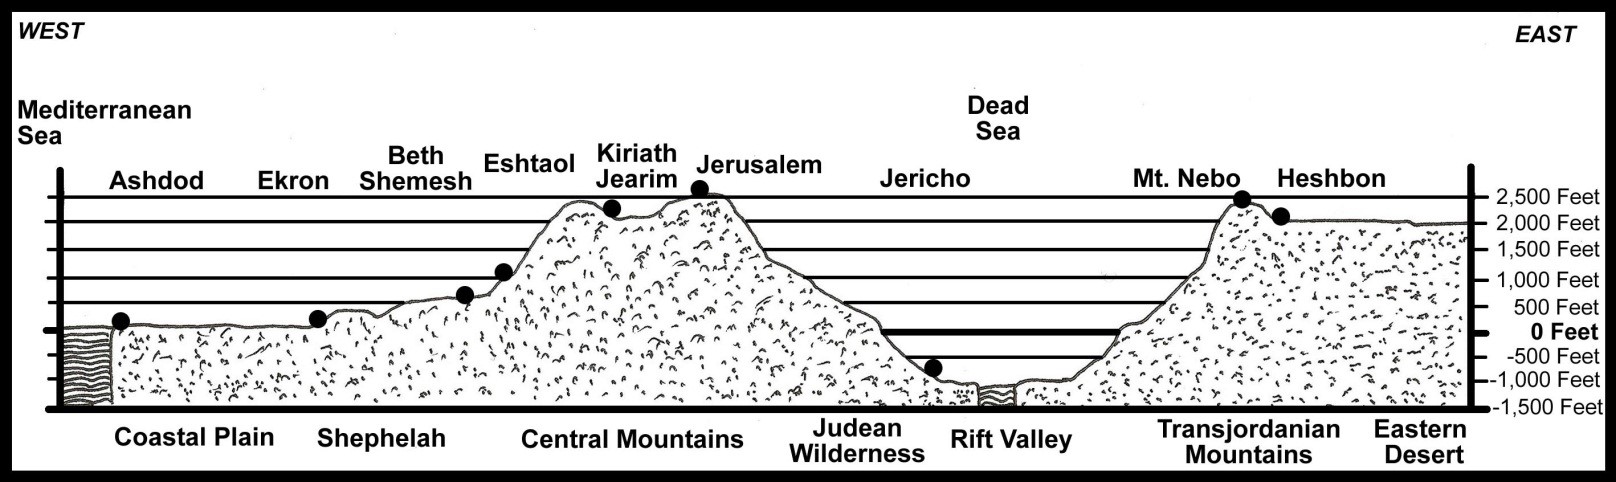 Topographical Cross-Section of Israel West to East